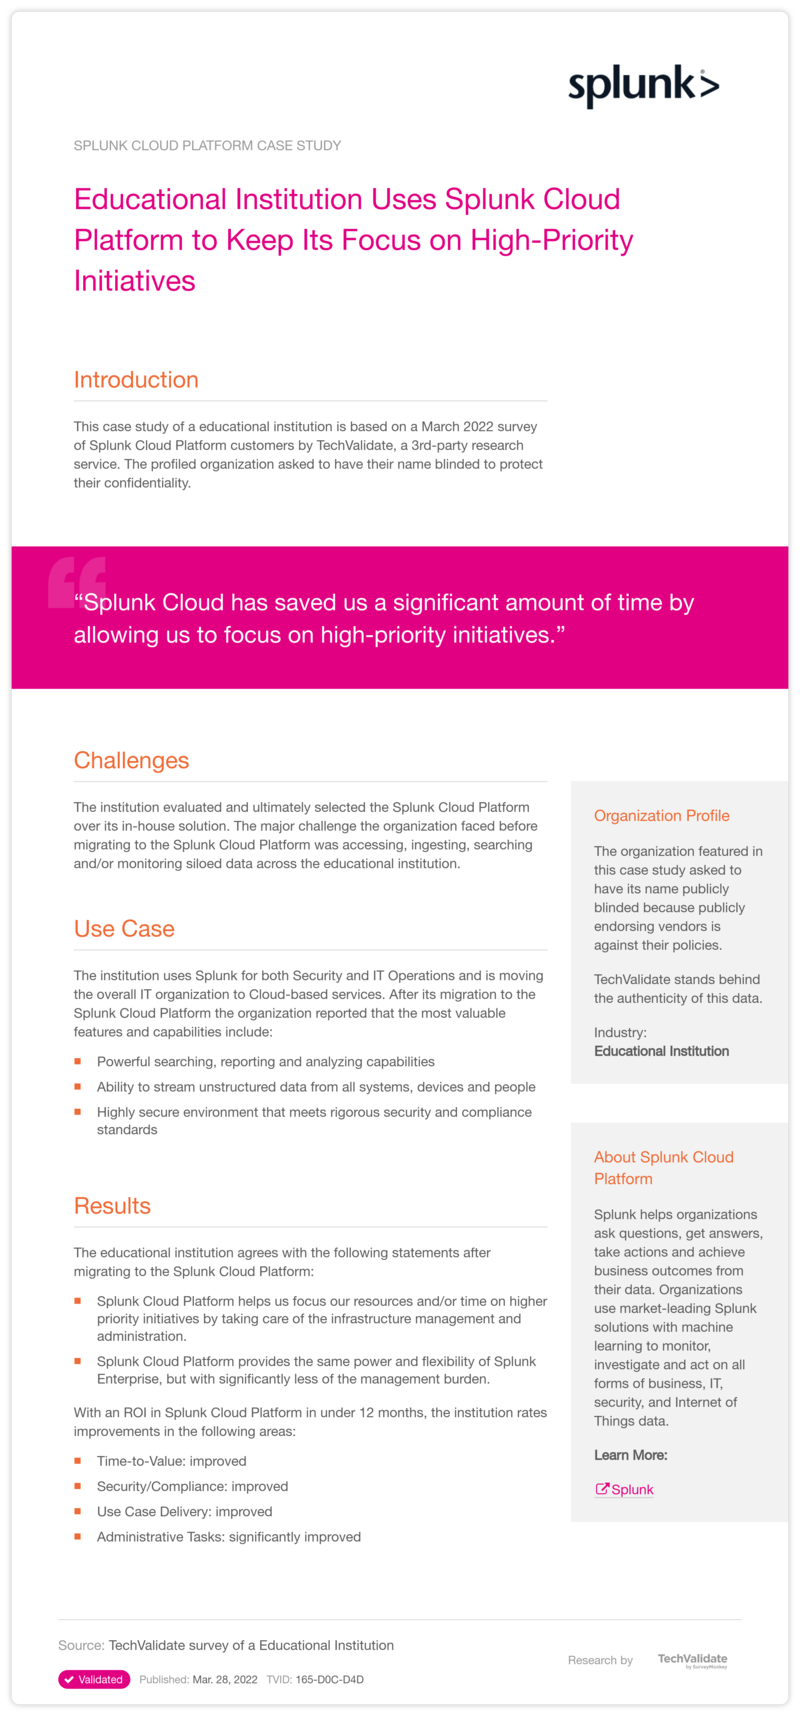 Educational Institution Uses Splunk Cloud Platform to Keep Its Focus on High-Priority Initiatives